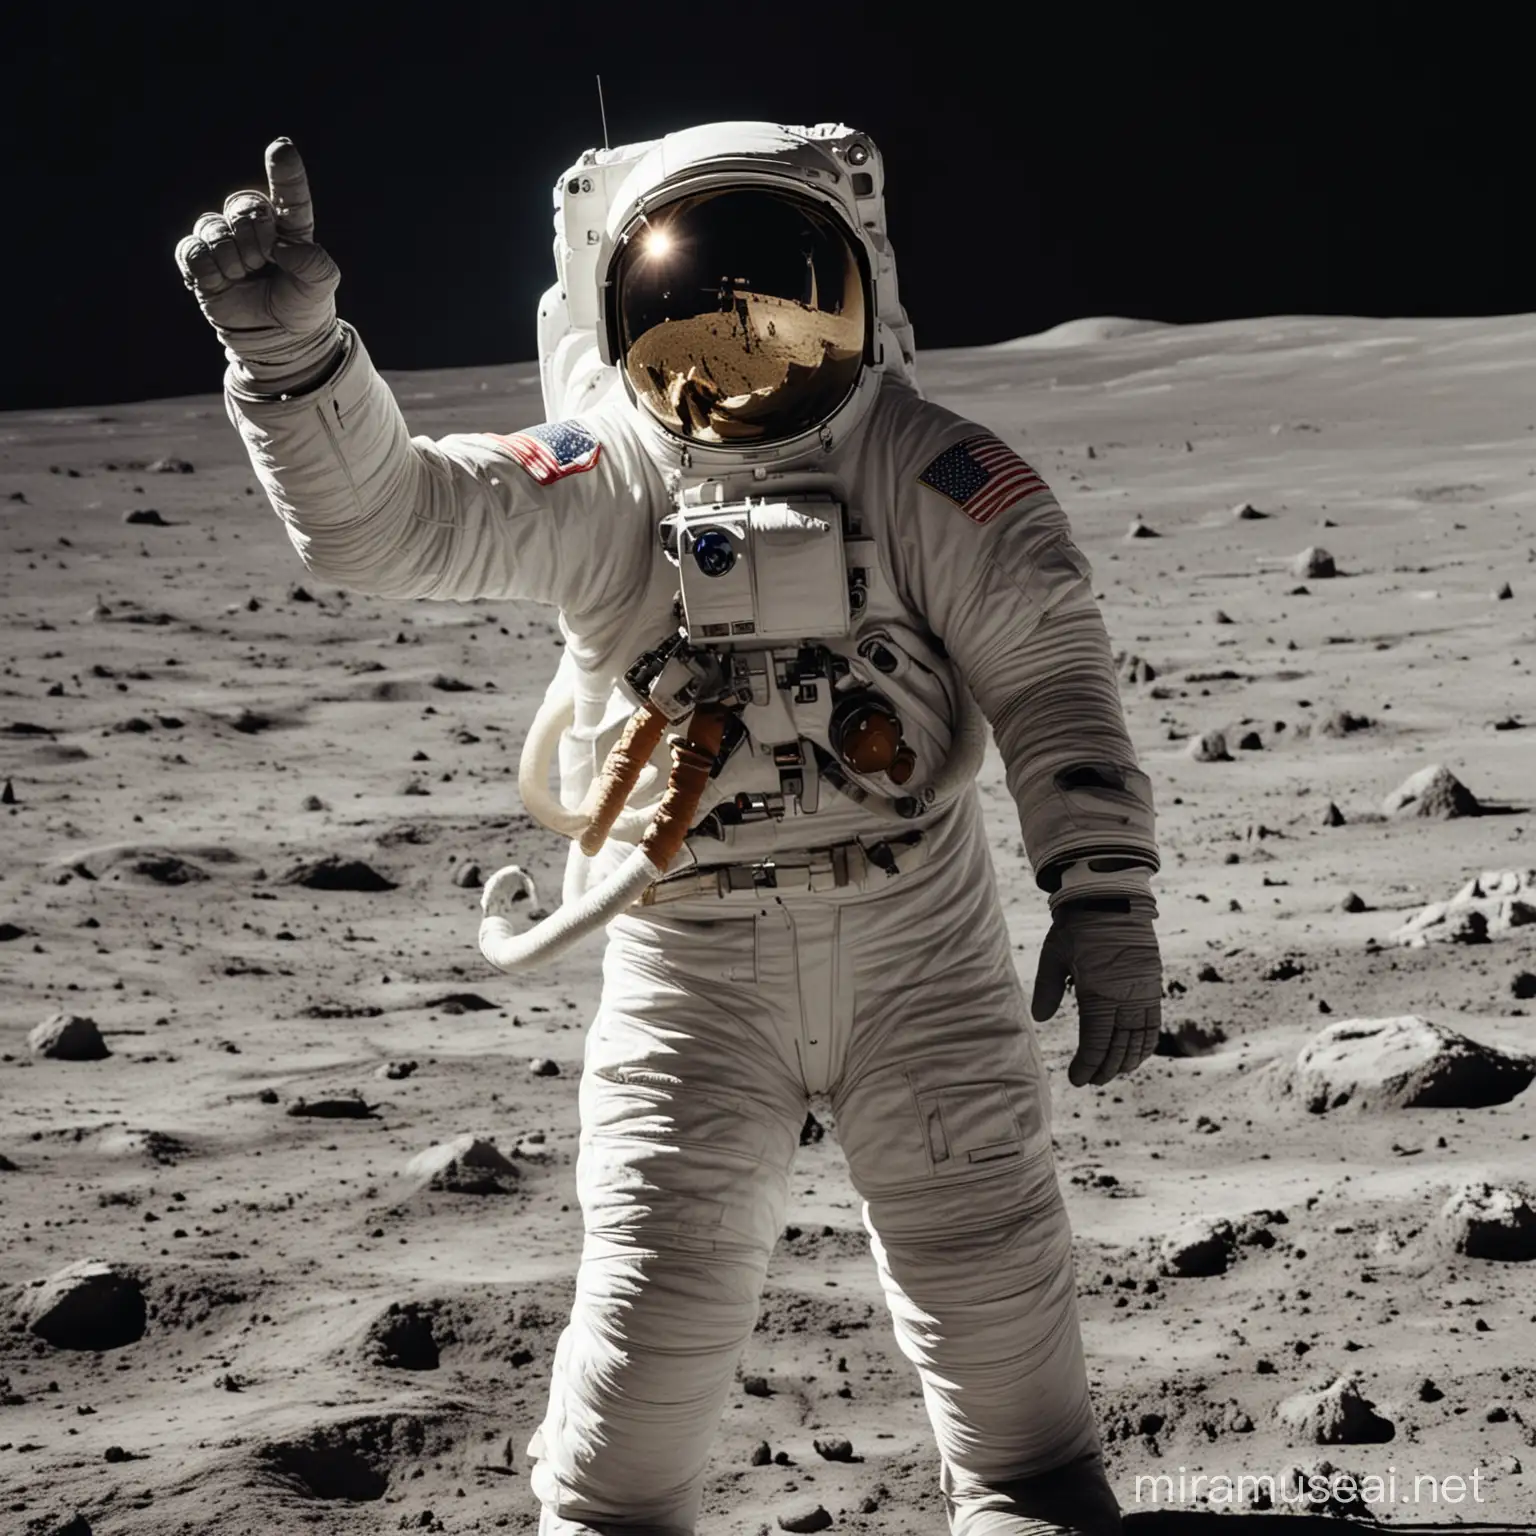 an astronaut in a closed spacesuit stands on the moon with his right arm bent at the elbow pointing upwards with his index finger raised from his fist